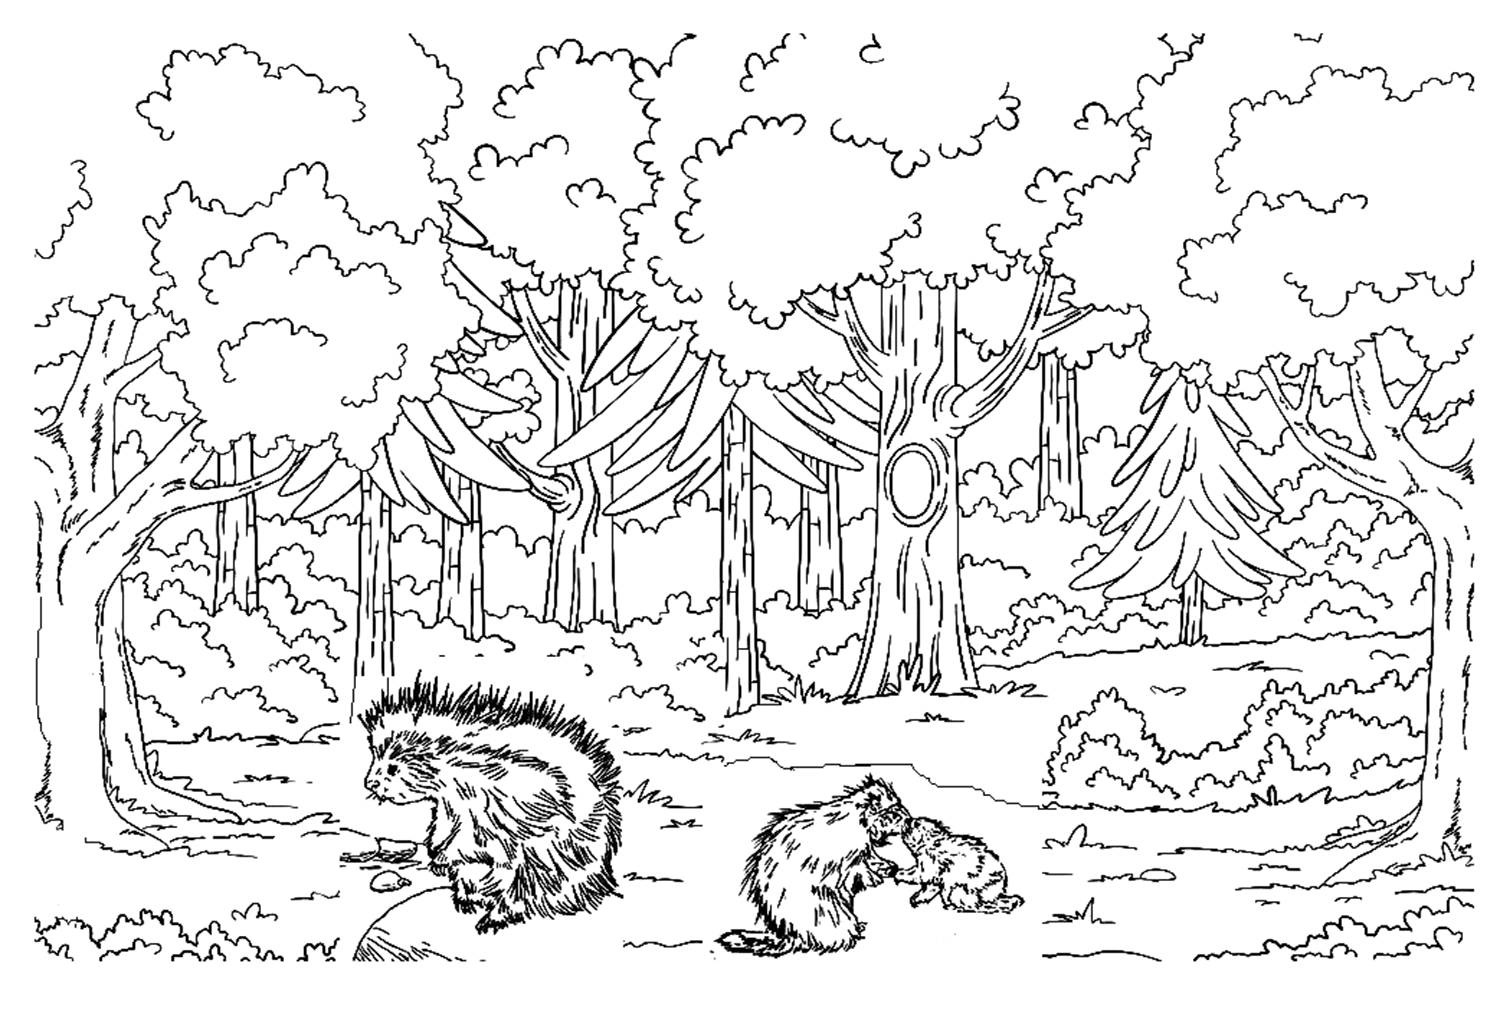 Family Of Porcupine Coloring Sheet from Porcupine